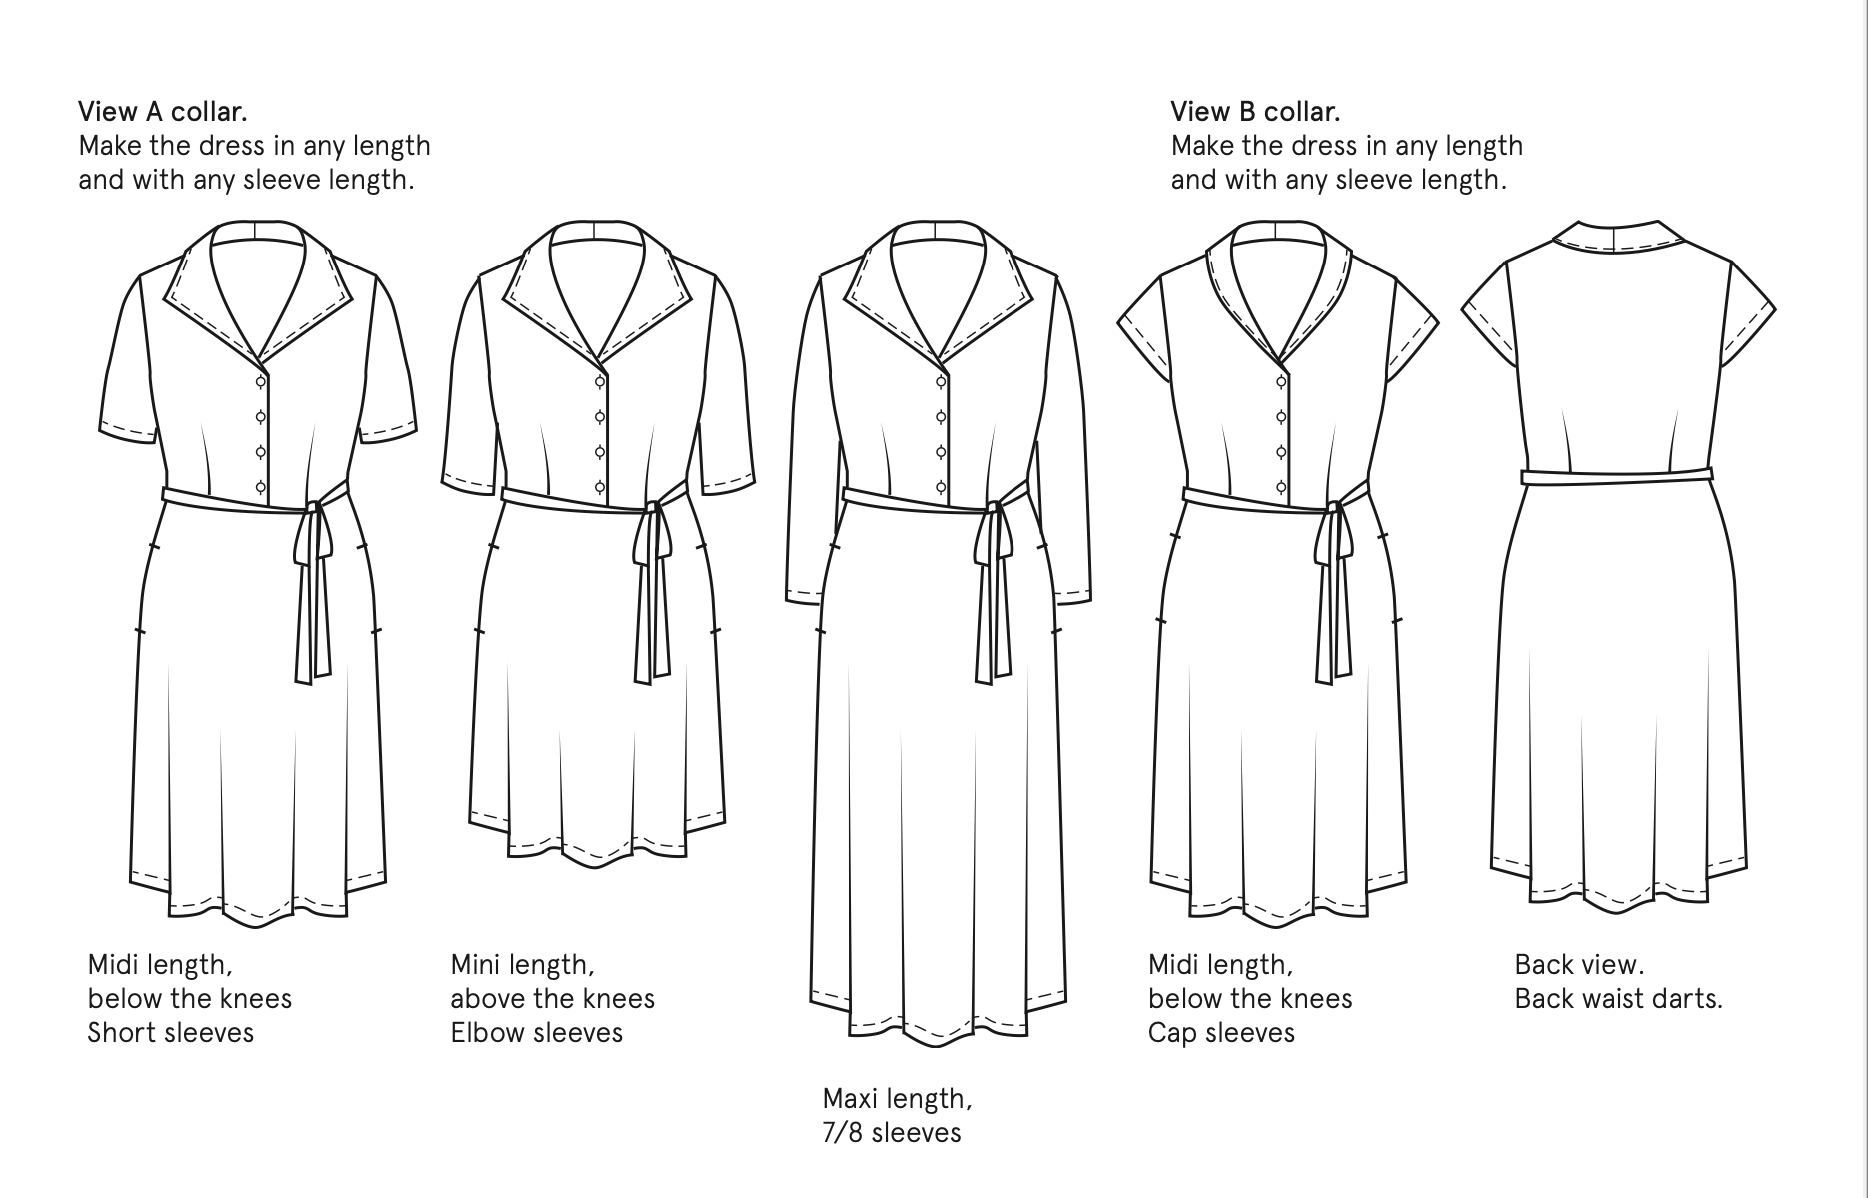 Black line drawings on a white background of  five dresses showing different options with sleeves, collar and lengths